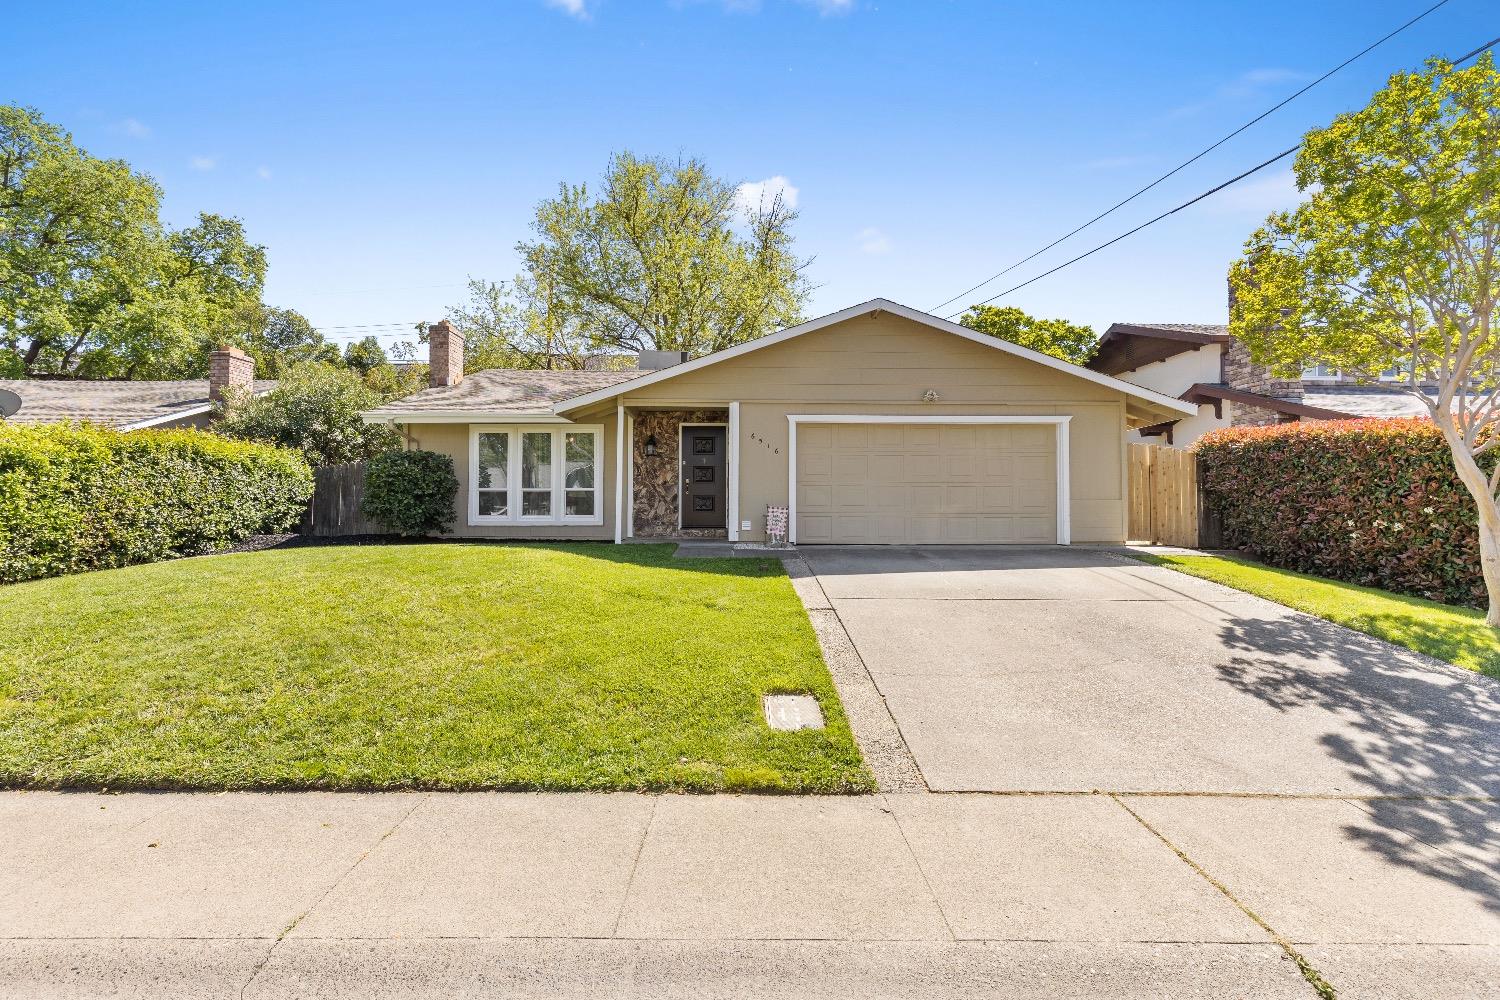 Photo of 6516 Woodpark Wy in Citrus Heights, CA